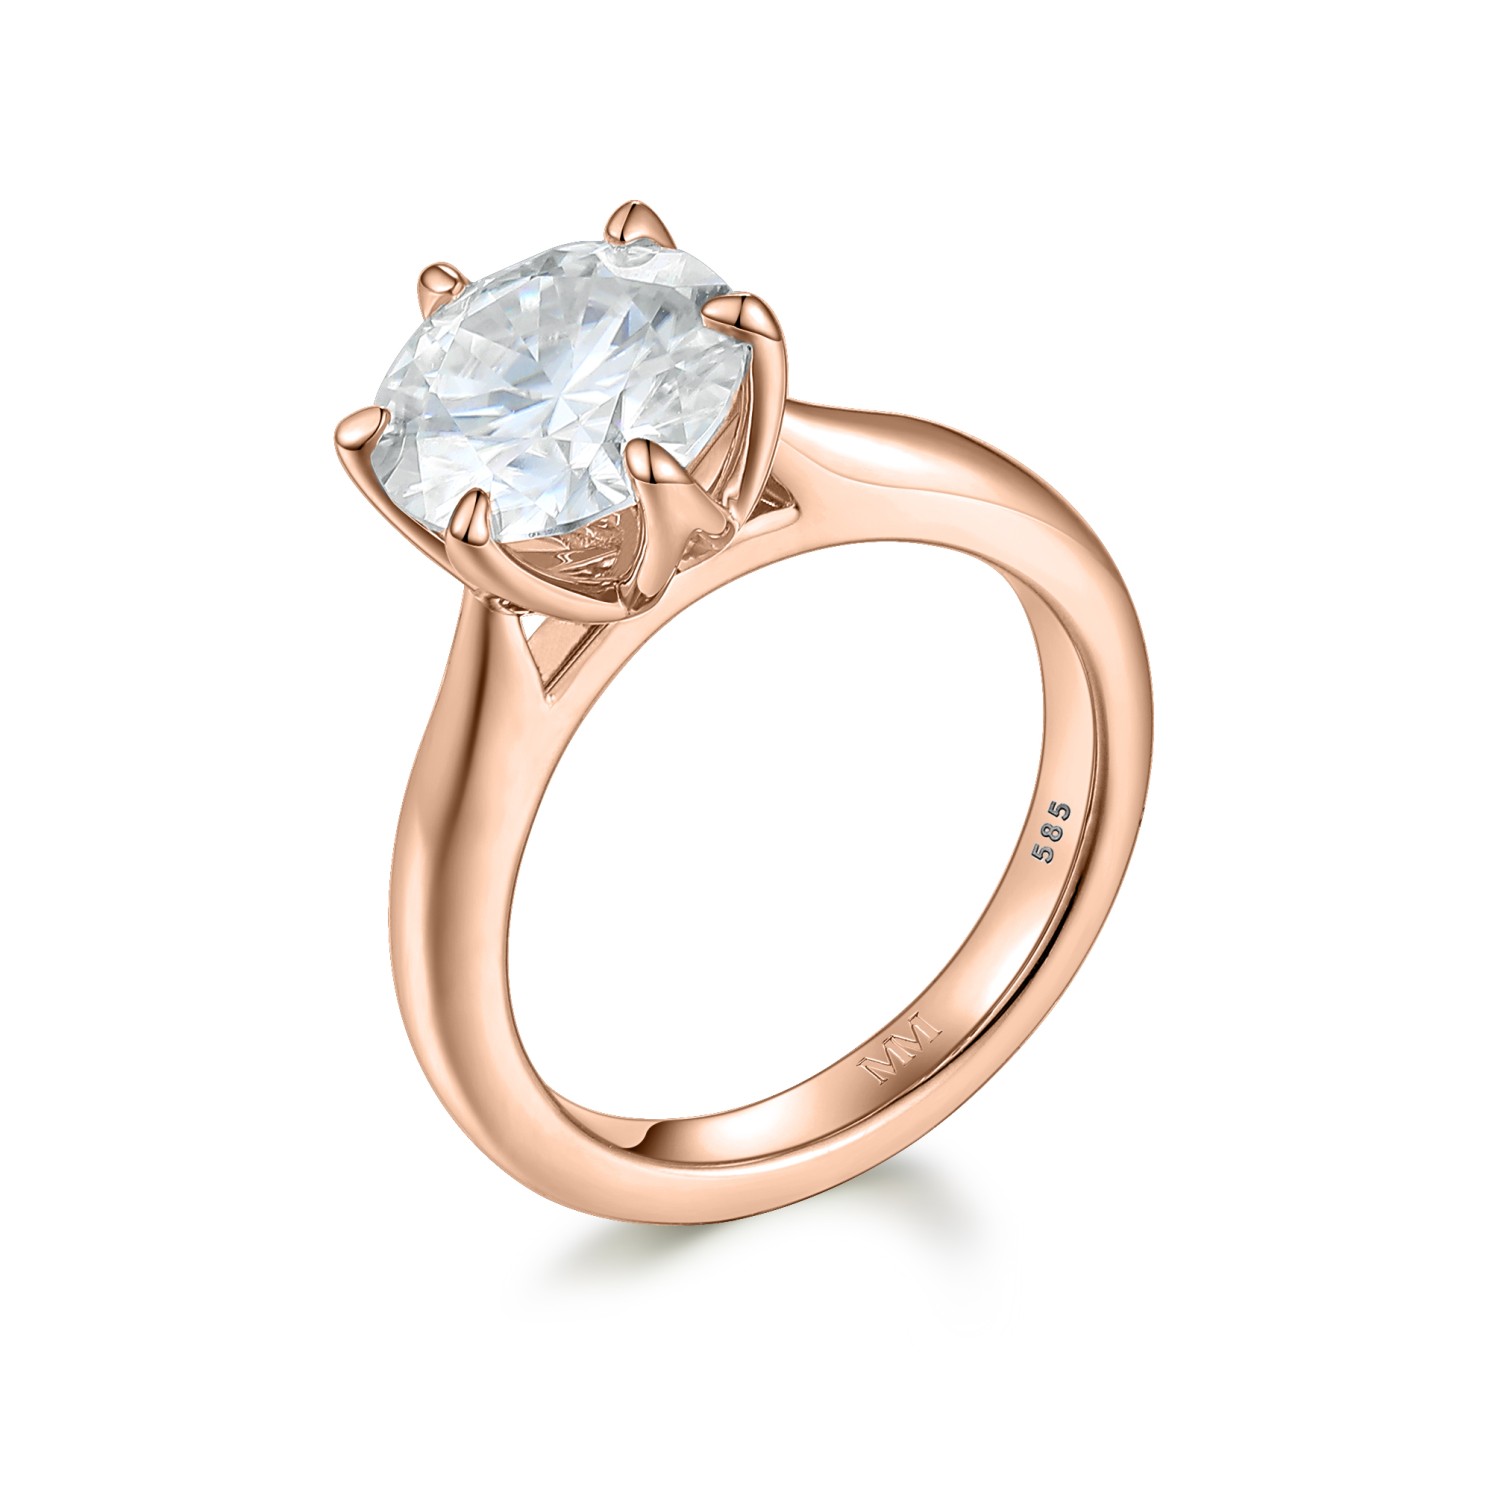 Yulia - Solitaire Moissanite Ring in Tulip Setting